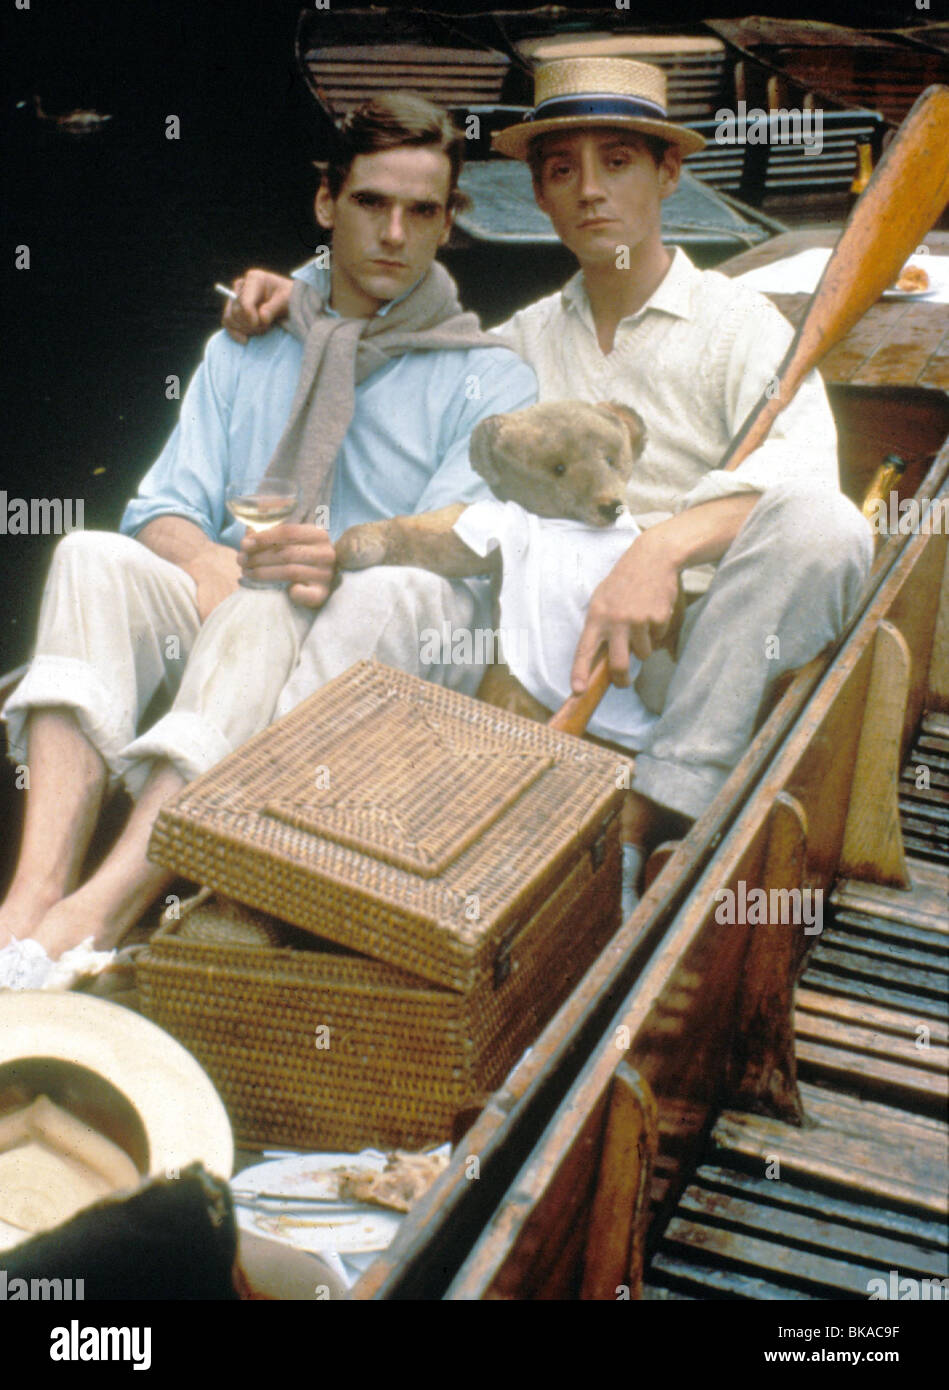 BRIDESHEAD REVISITED (TV - 1981) JEREMY IRONS, ANTHONY ANDREWS CREDIT BBC BHRV 005 Stock Photo